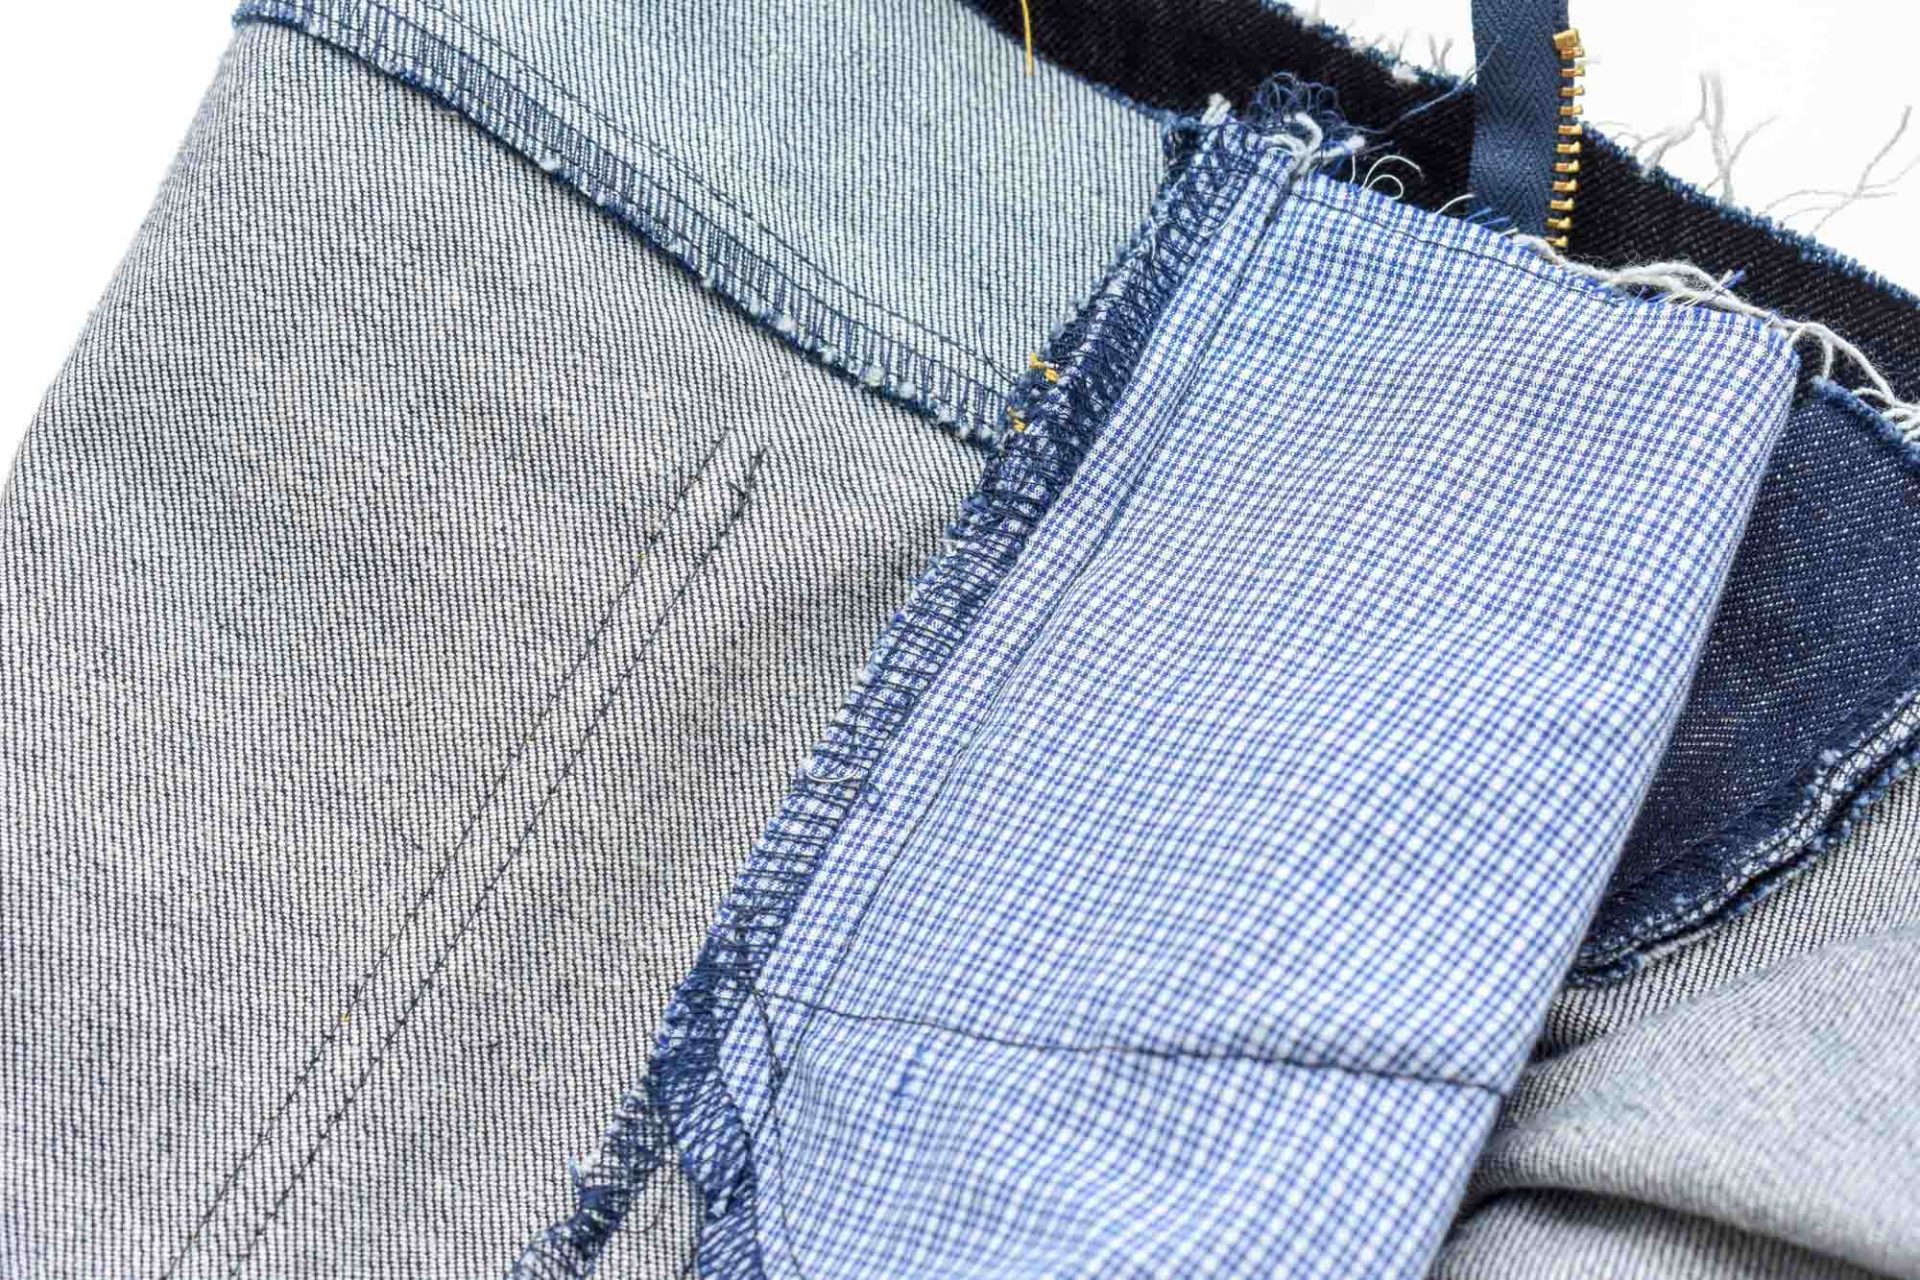 How to sew the jeans yoke and side seams - The Last Stitch